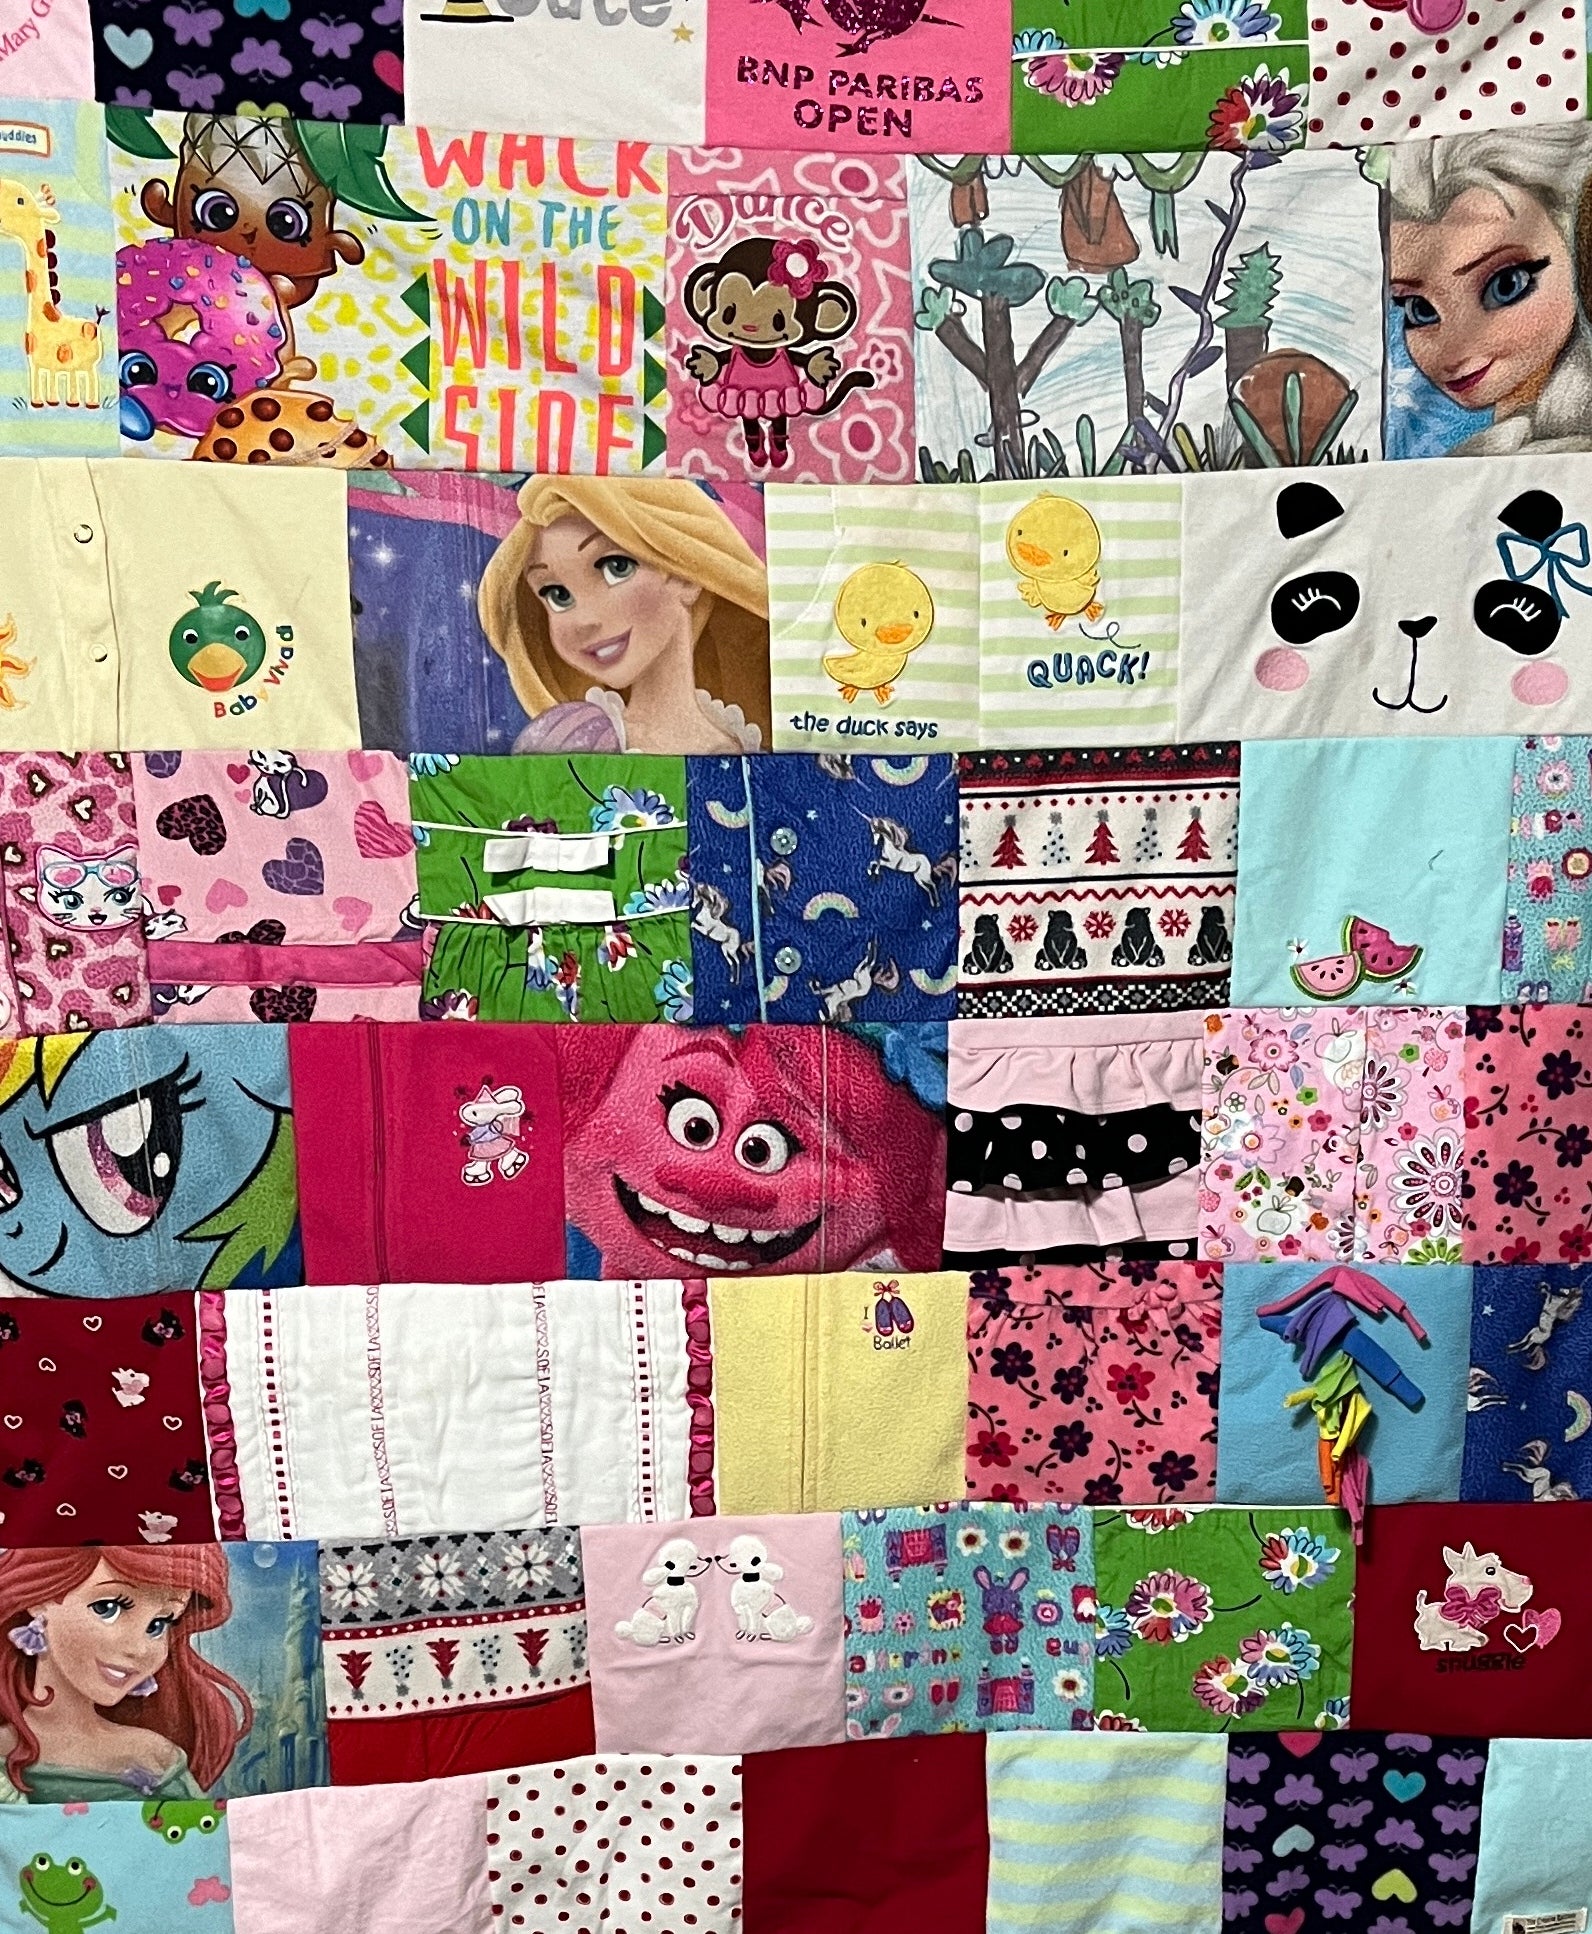 keepsake memory quilt, made from baby - older kids clothes